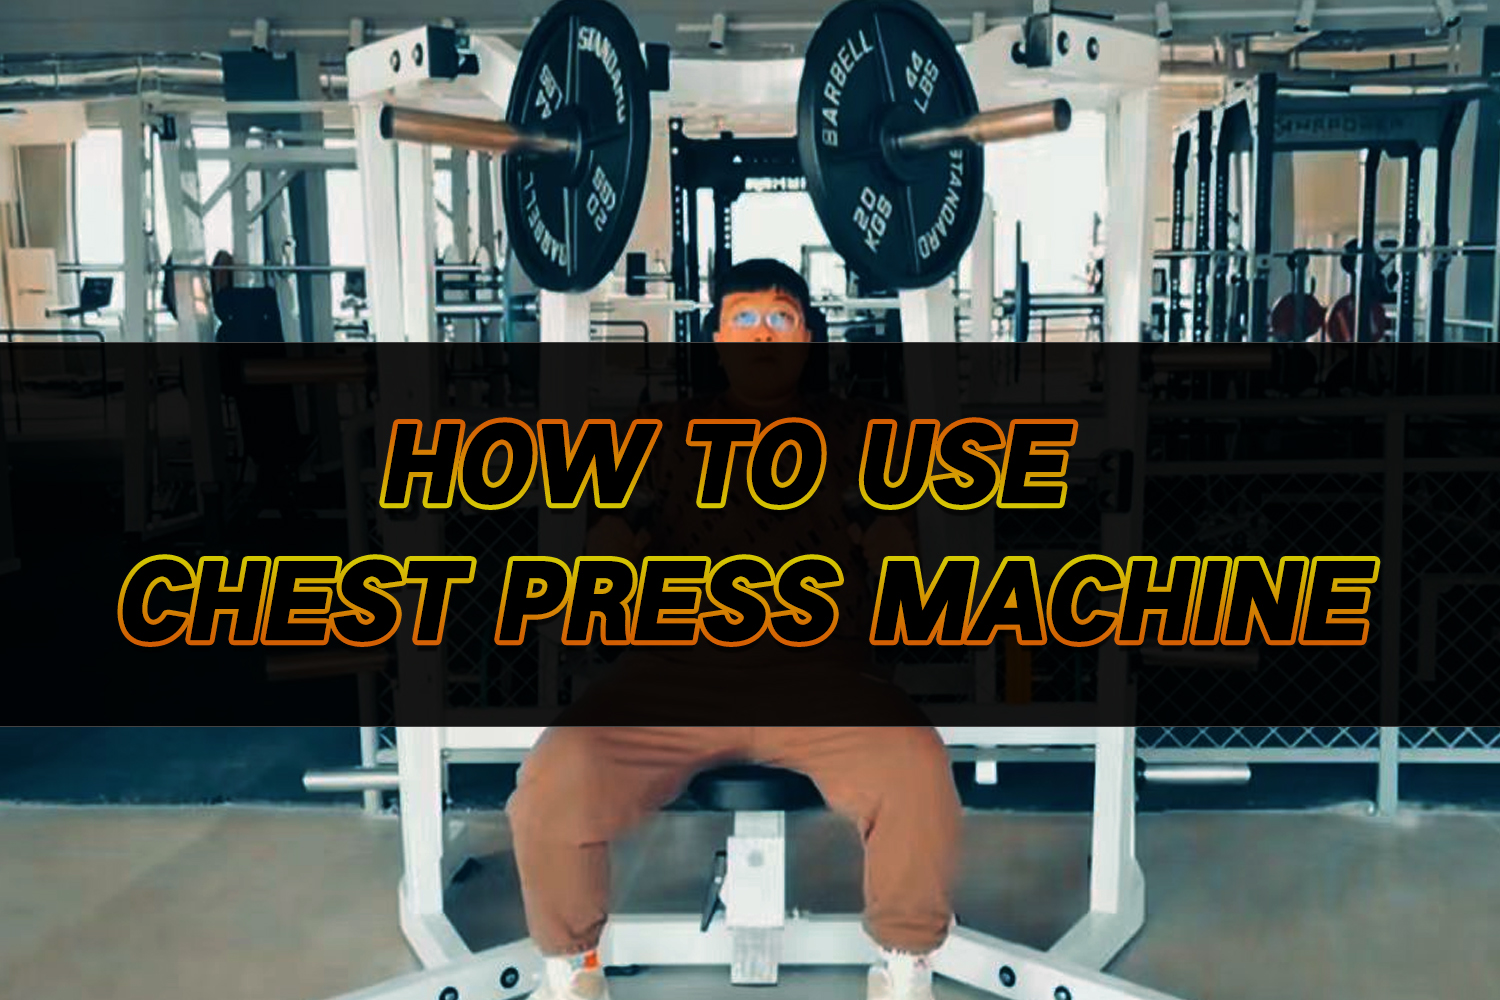 How to use chest press machine?